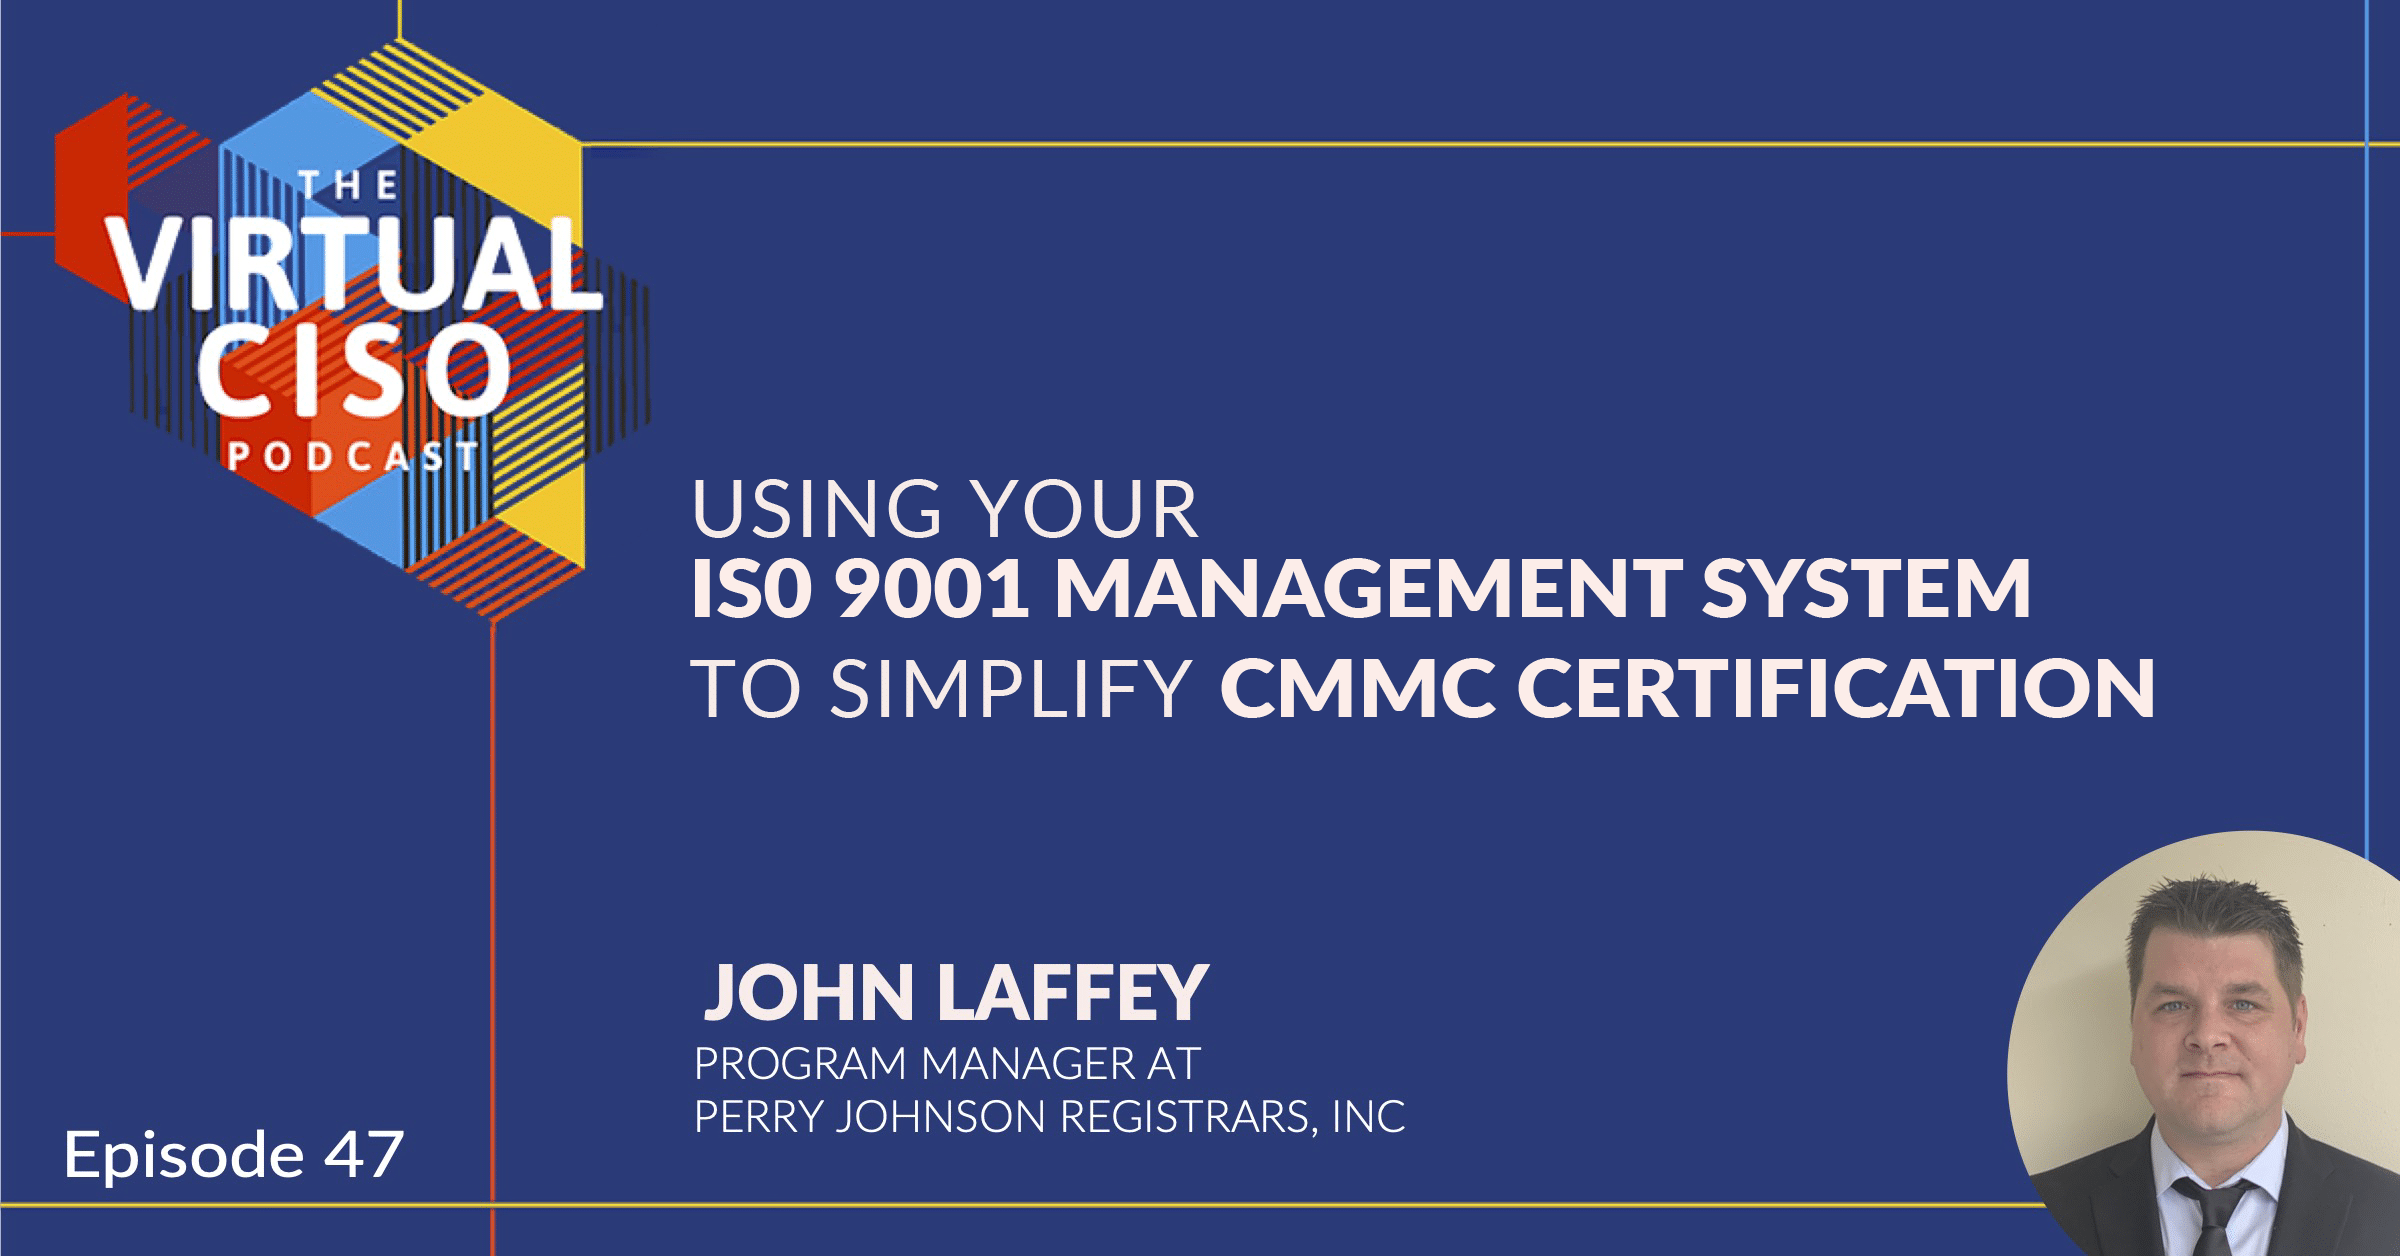 Using your ISO 9001 Management System to Simplify CMMC Certification